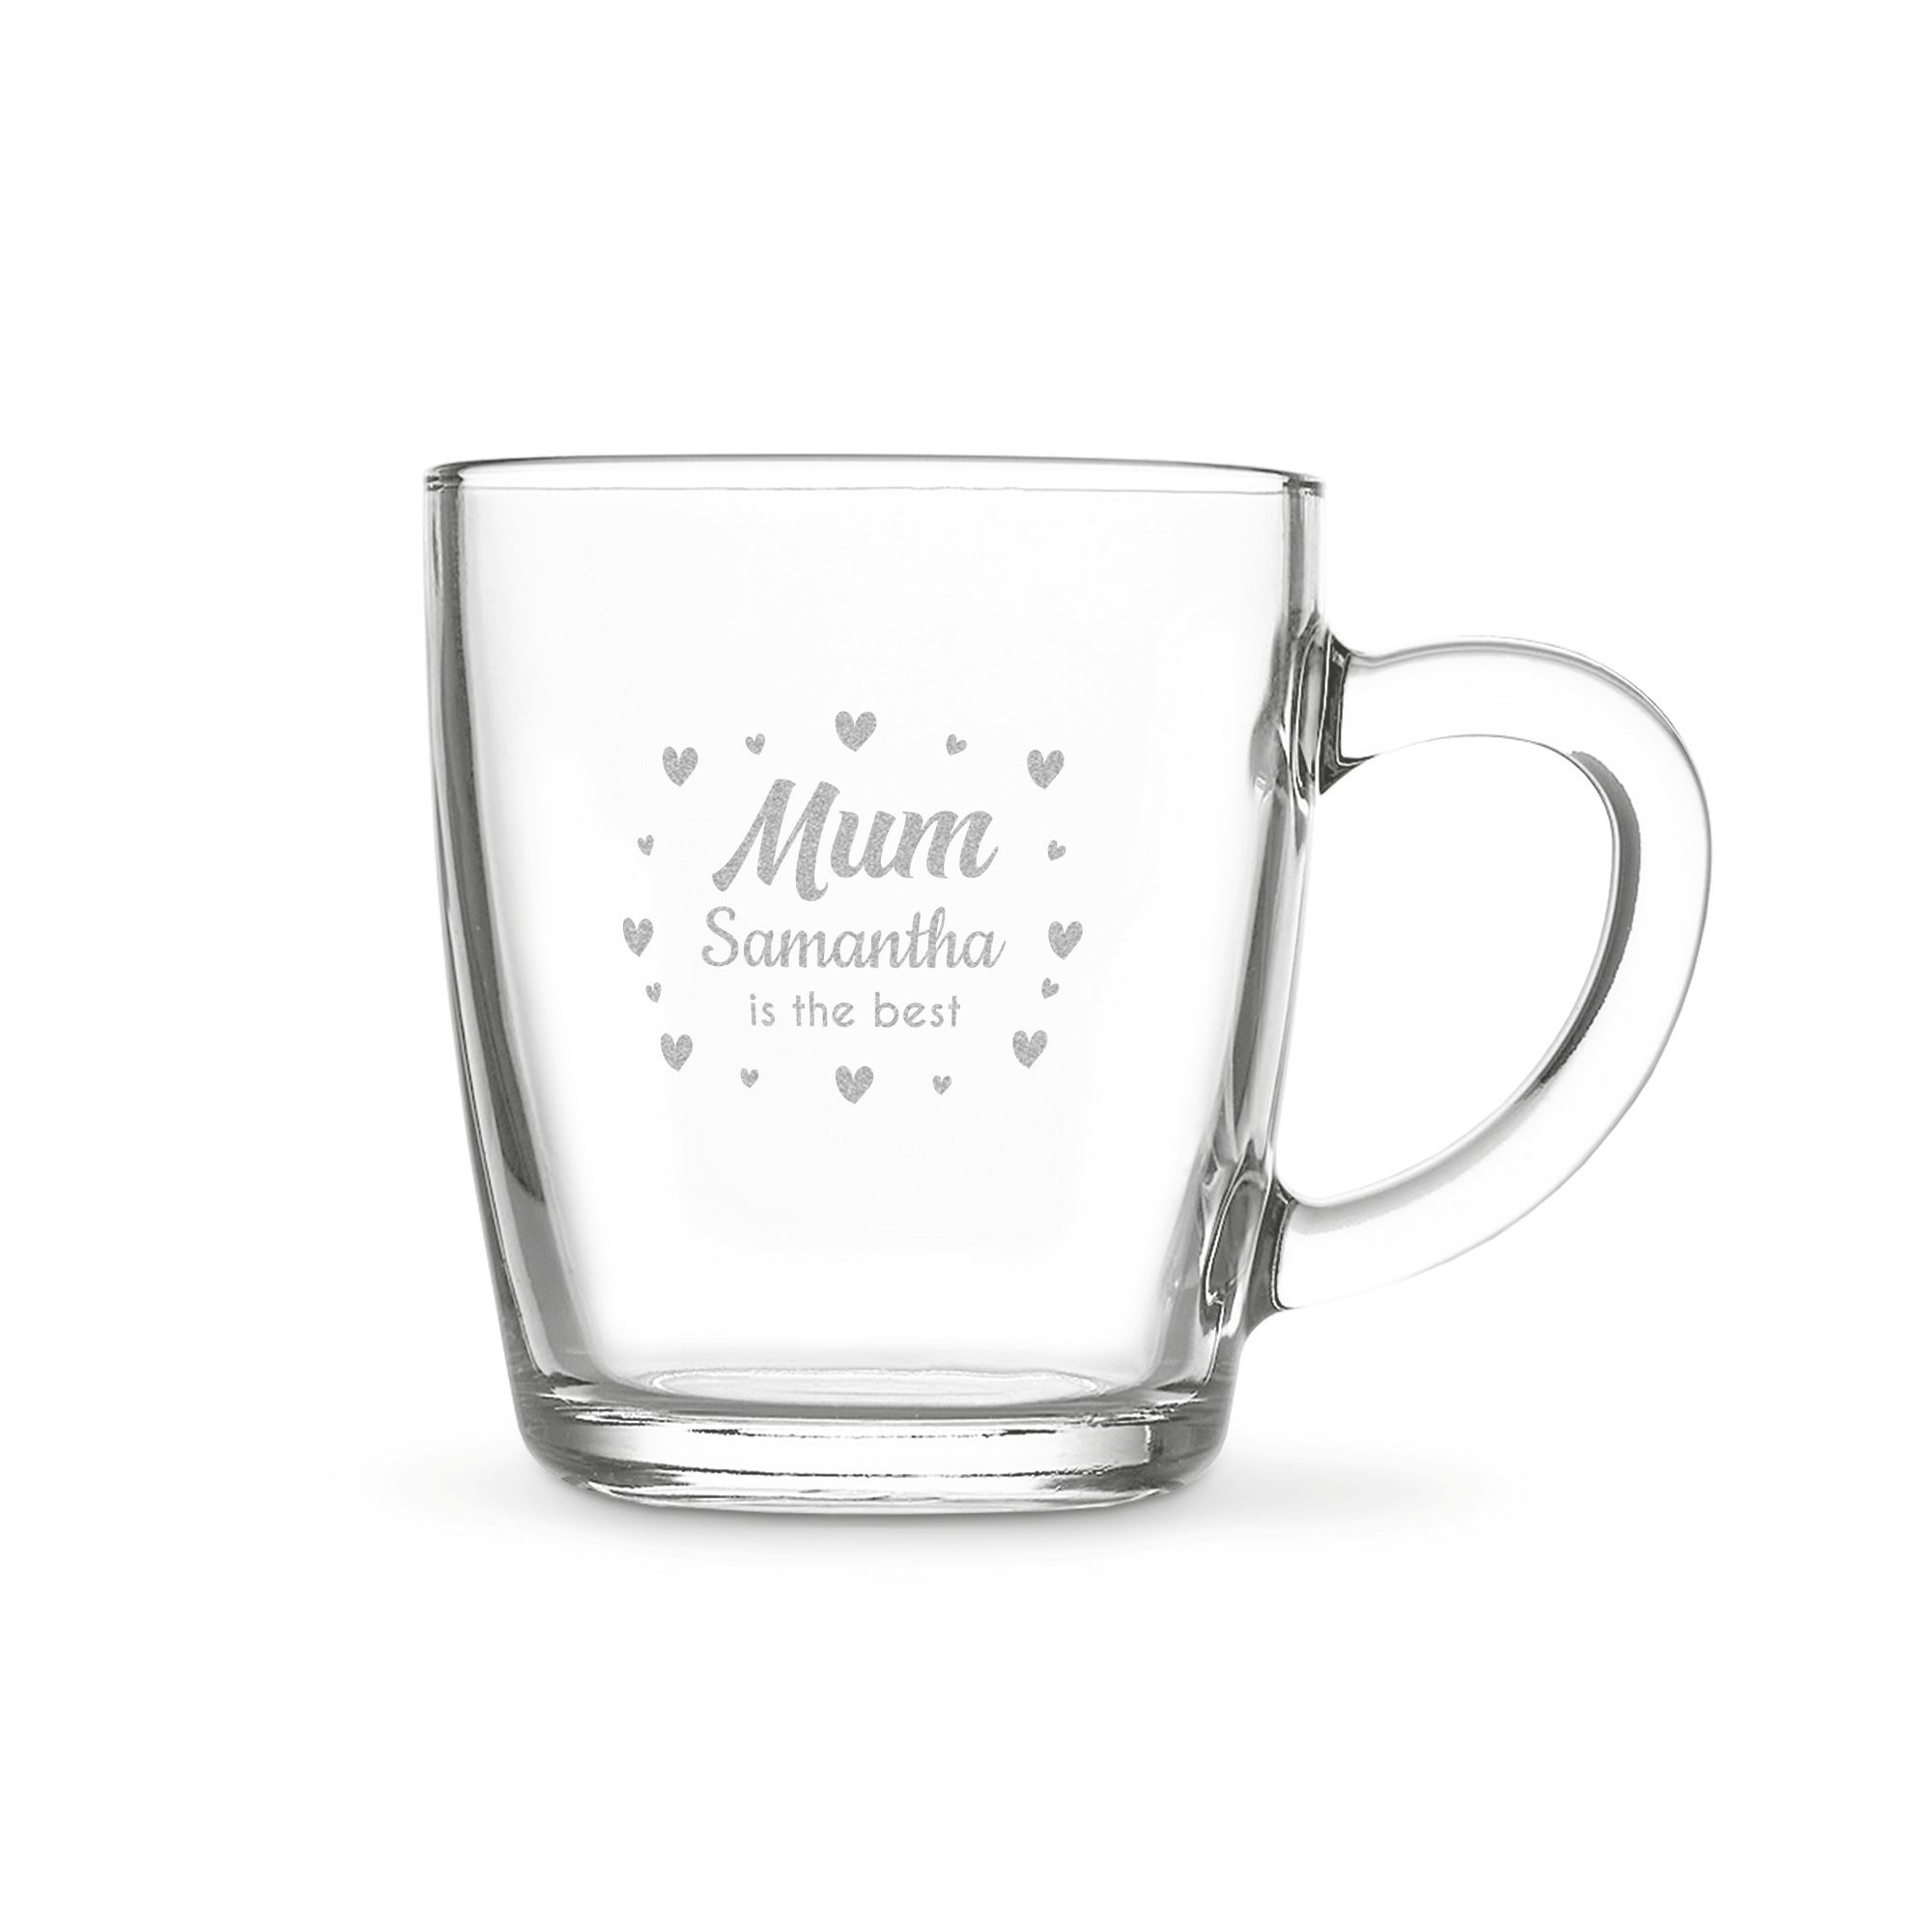 Personalised glass mug - Mother's Day - Engraved - 2 pcs